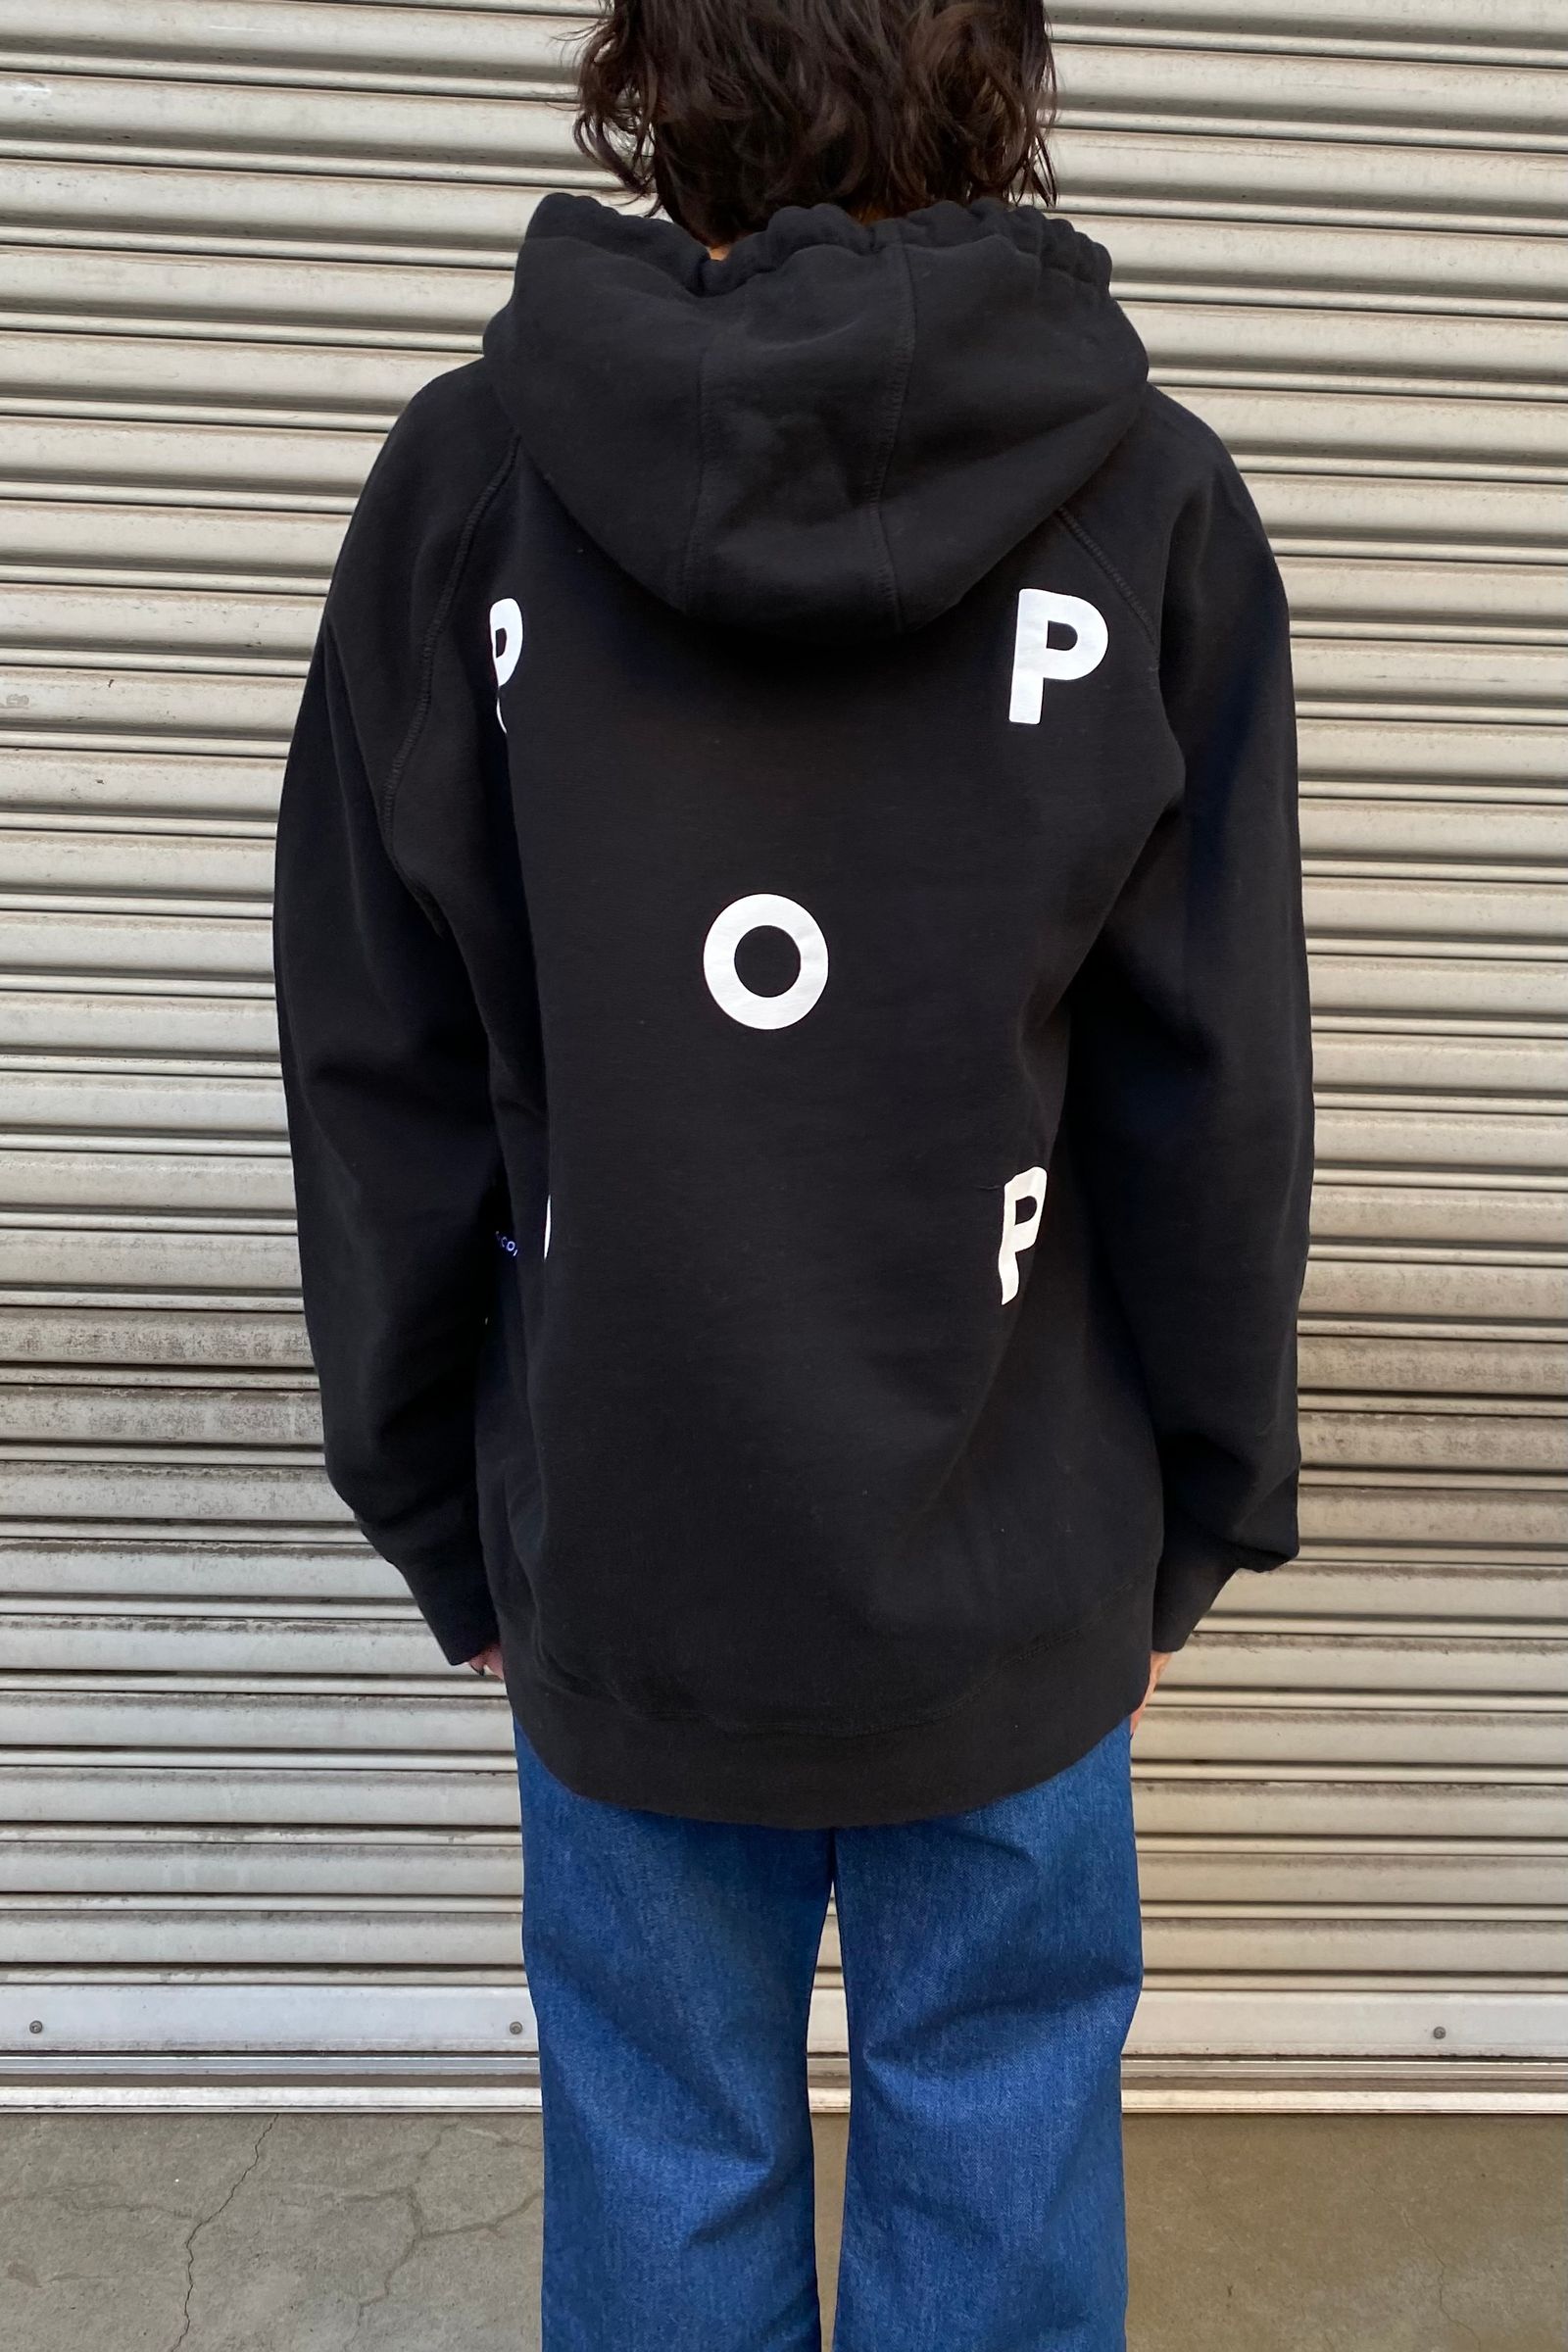 Pop Trading Company - logo hooded sweat -black- nos collection ...